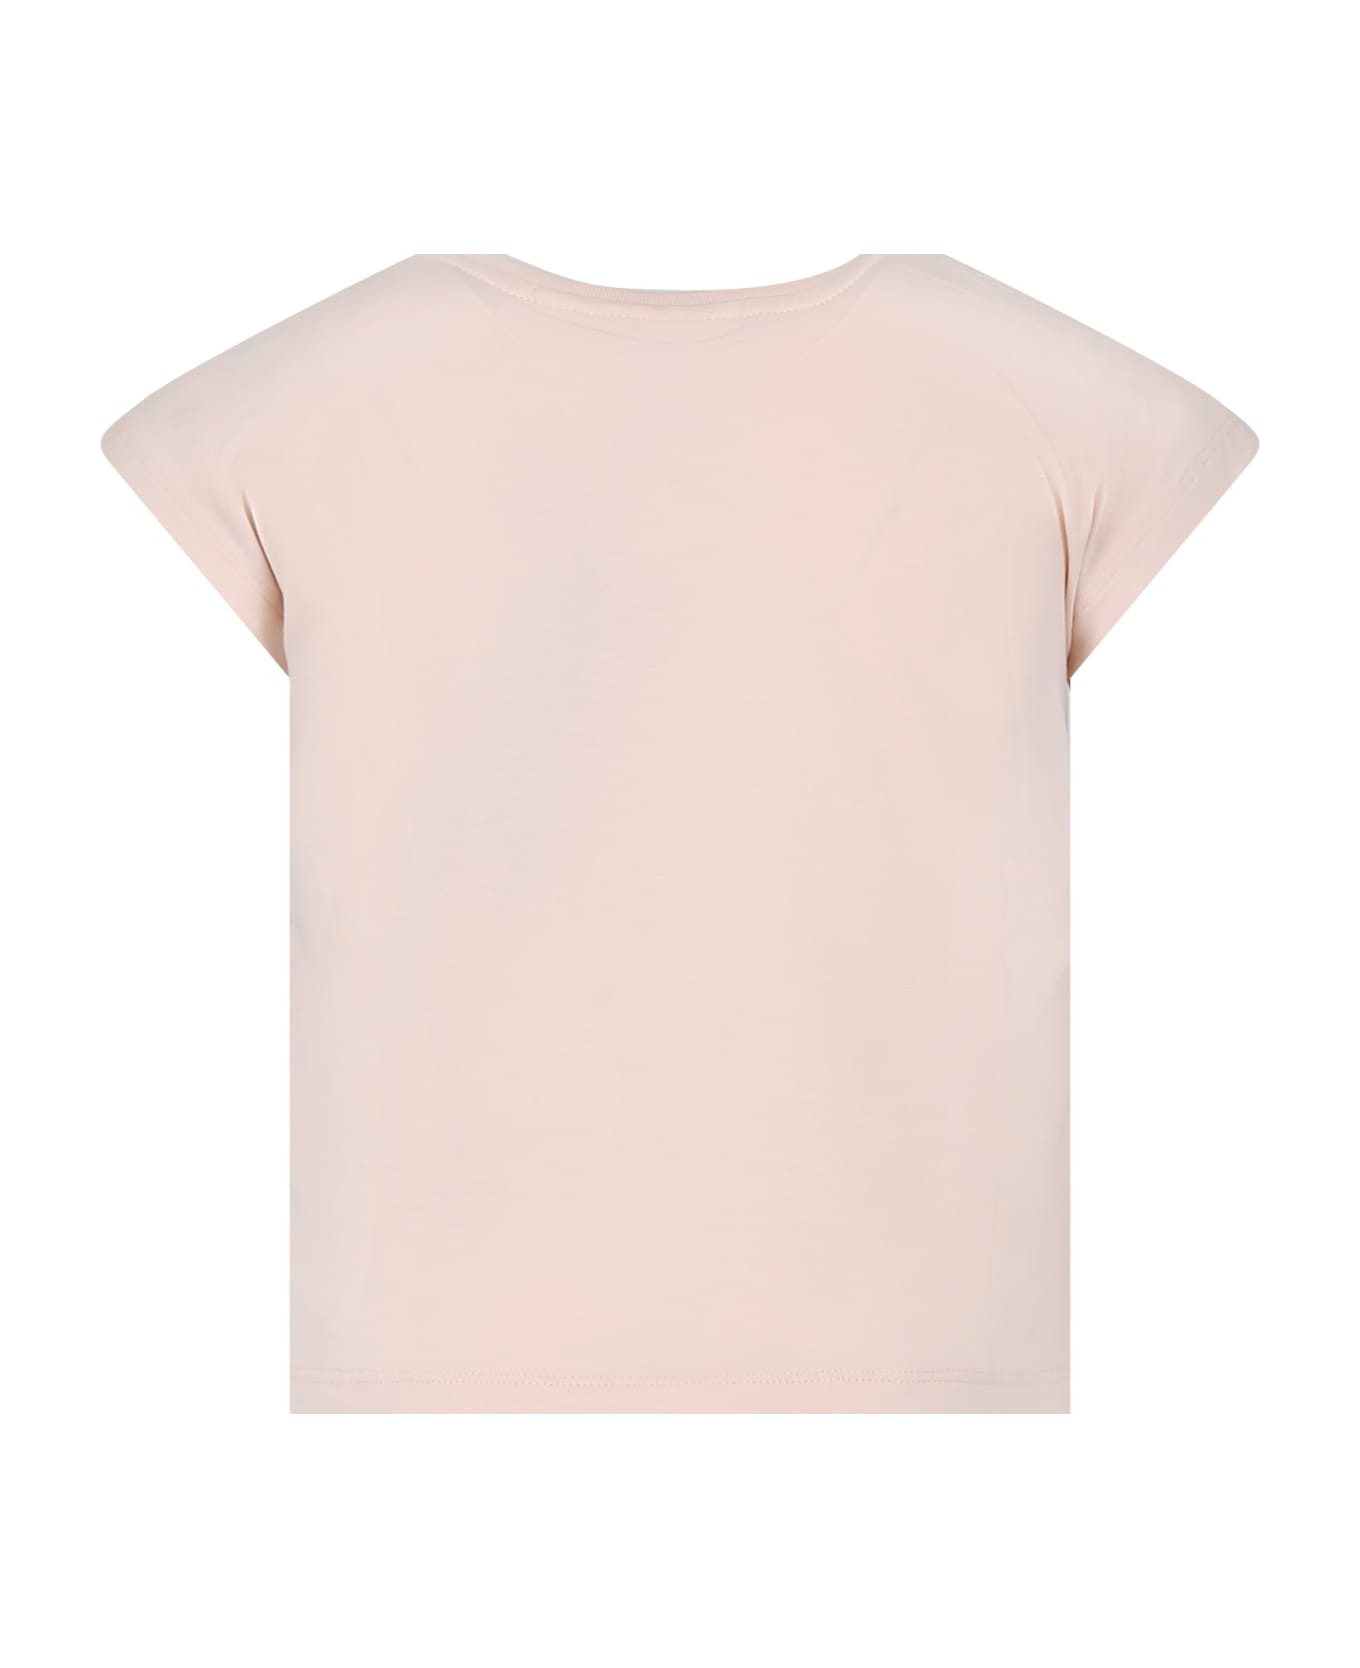 Molo Pink T-shirt For Girl - Pink